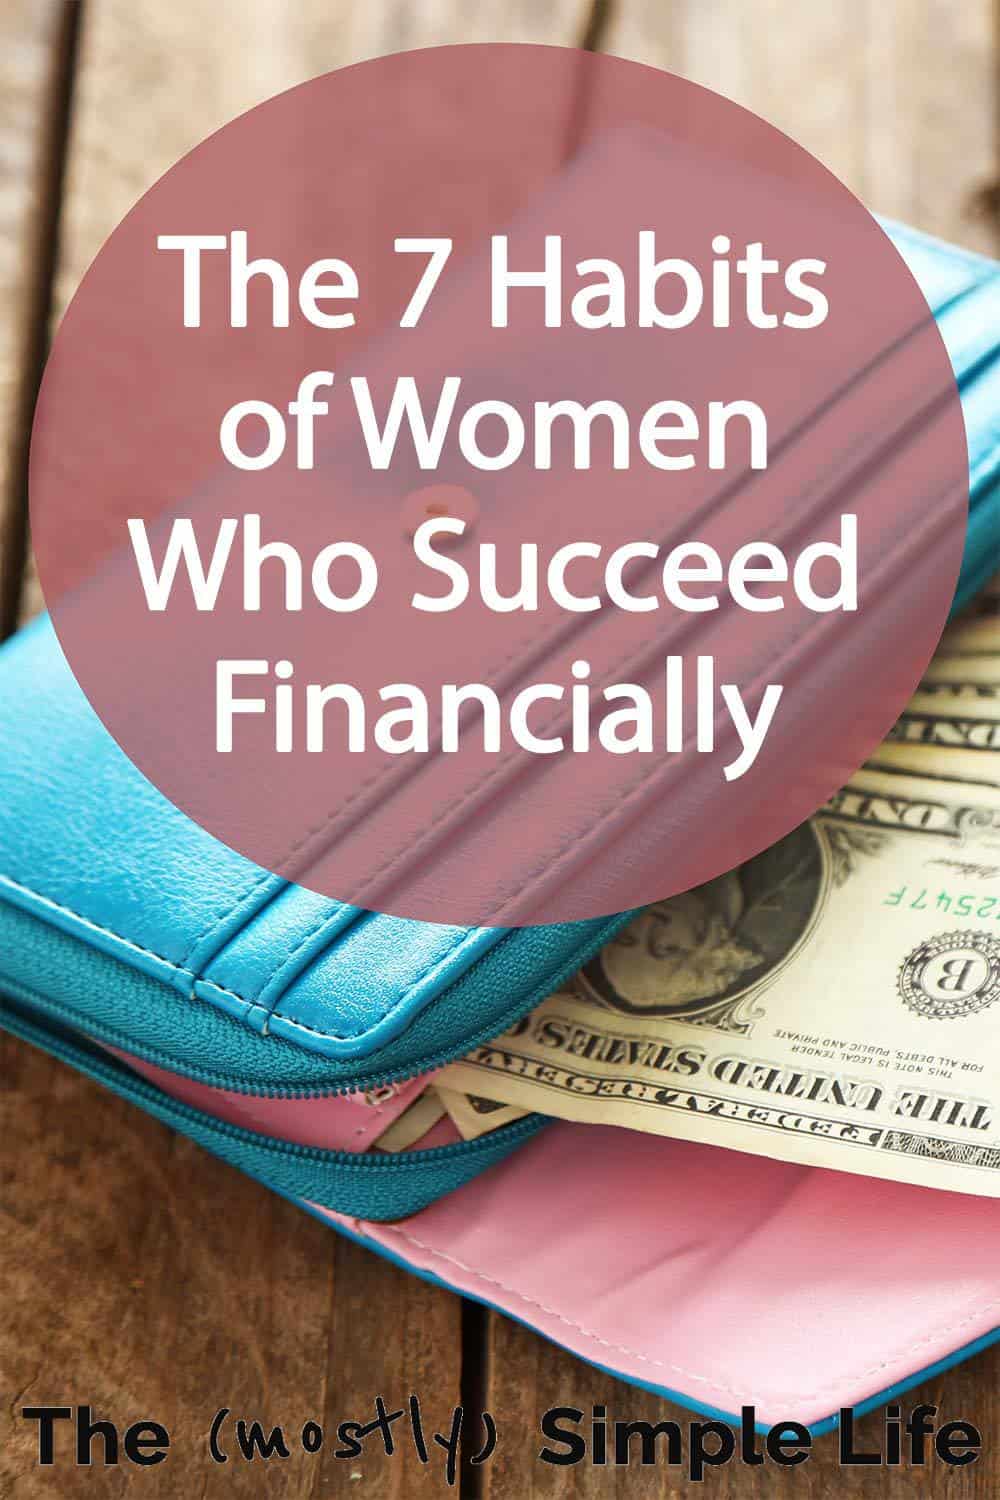 7 Habits of Women Who Succeed Financially